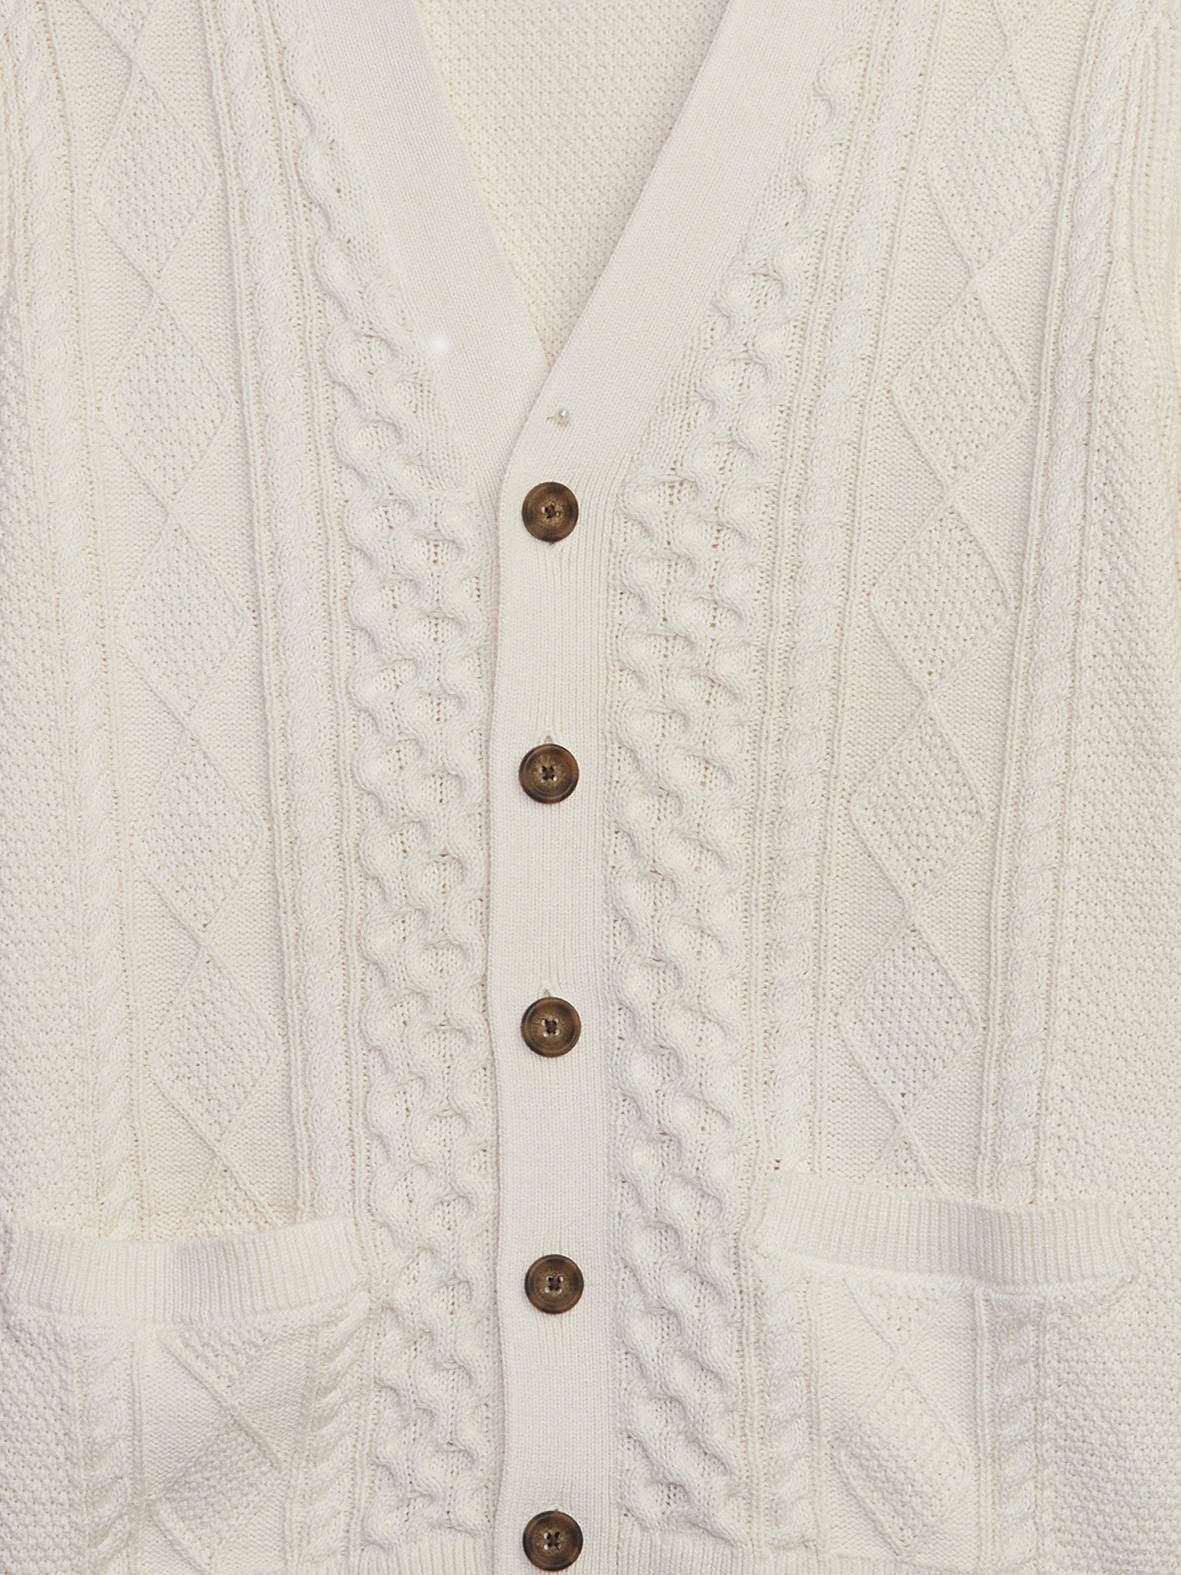 Cable-Knit Cardigan | Gap Factory